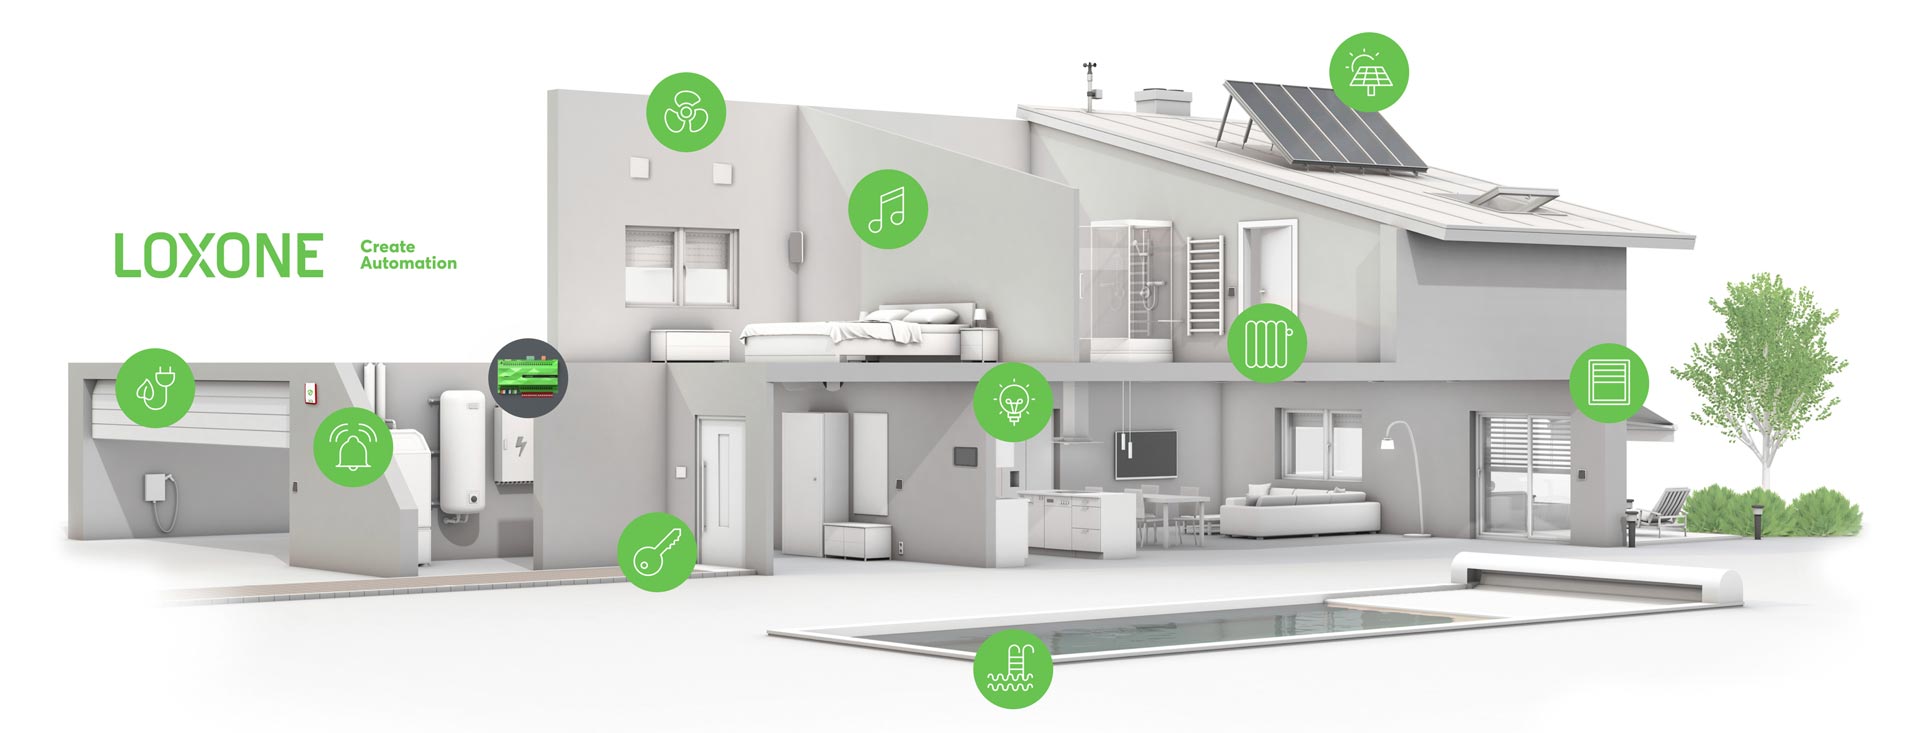 Loxone 3D Visualisierung & Smart Home Icons